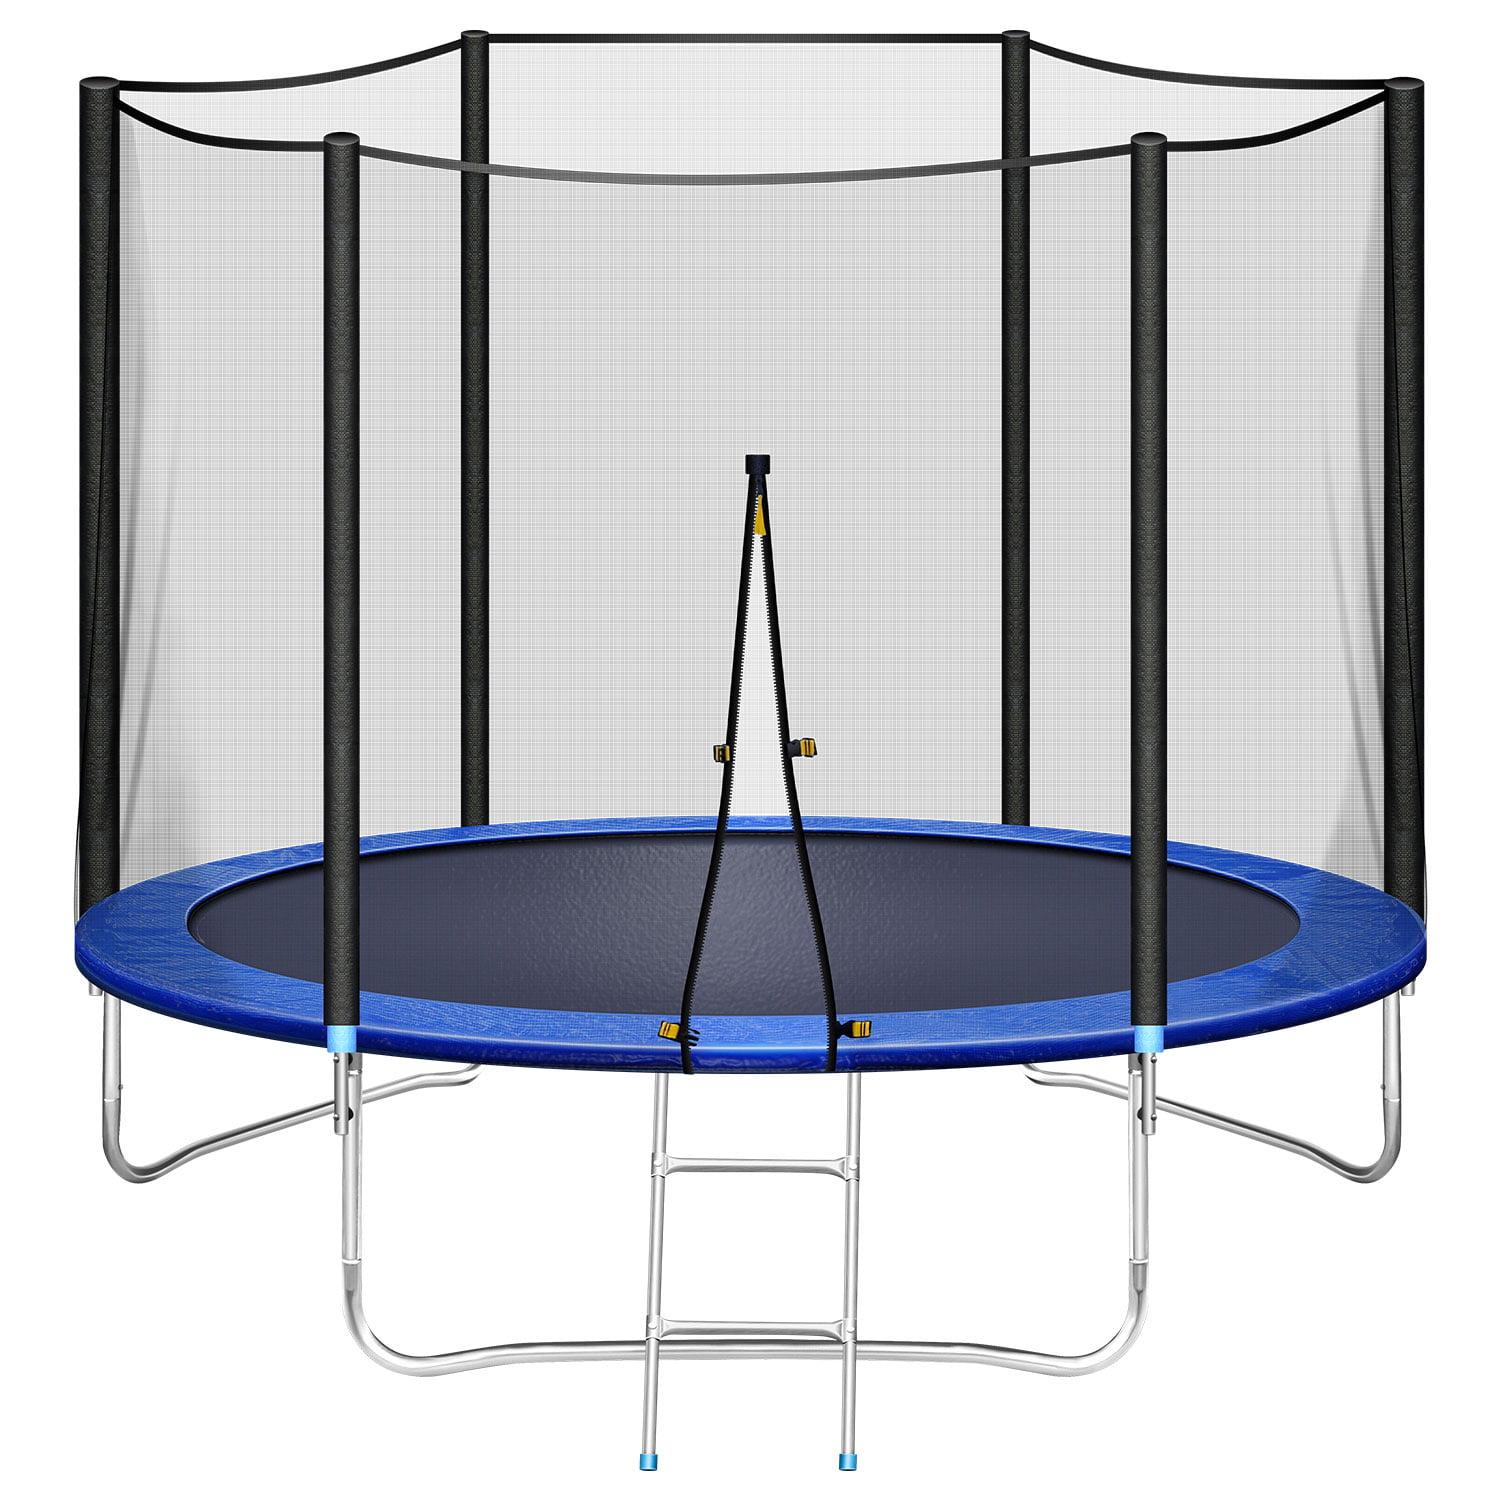 Uskyld Ellers Illusion Trampoline 10 FT with Safe Enclosure Net, Kids Trampoline for Play &  Exercise Indoor or Outdoor, 661 LB Capacity for 3-4 Kids, Waterproof Jump  Mat, Backyard Trampoline Ladder for Adults Jump Sports - Walmart.com